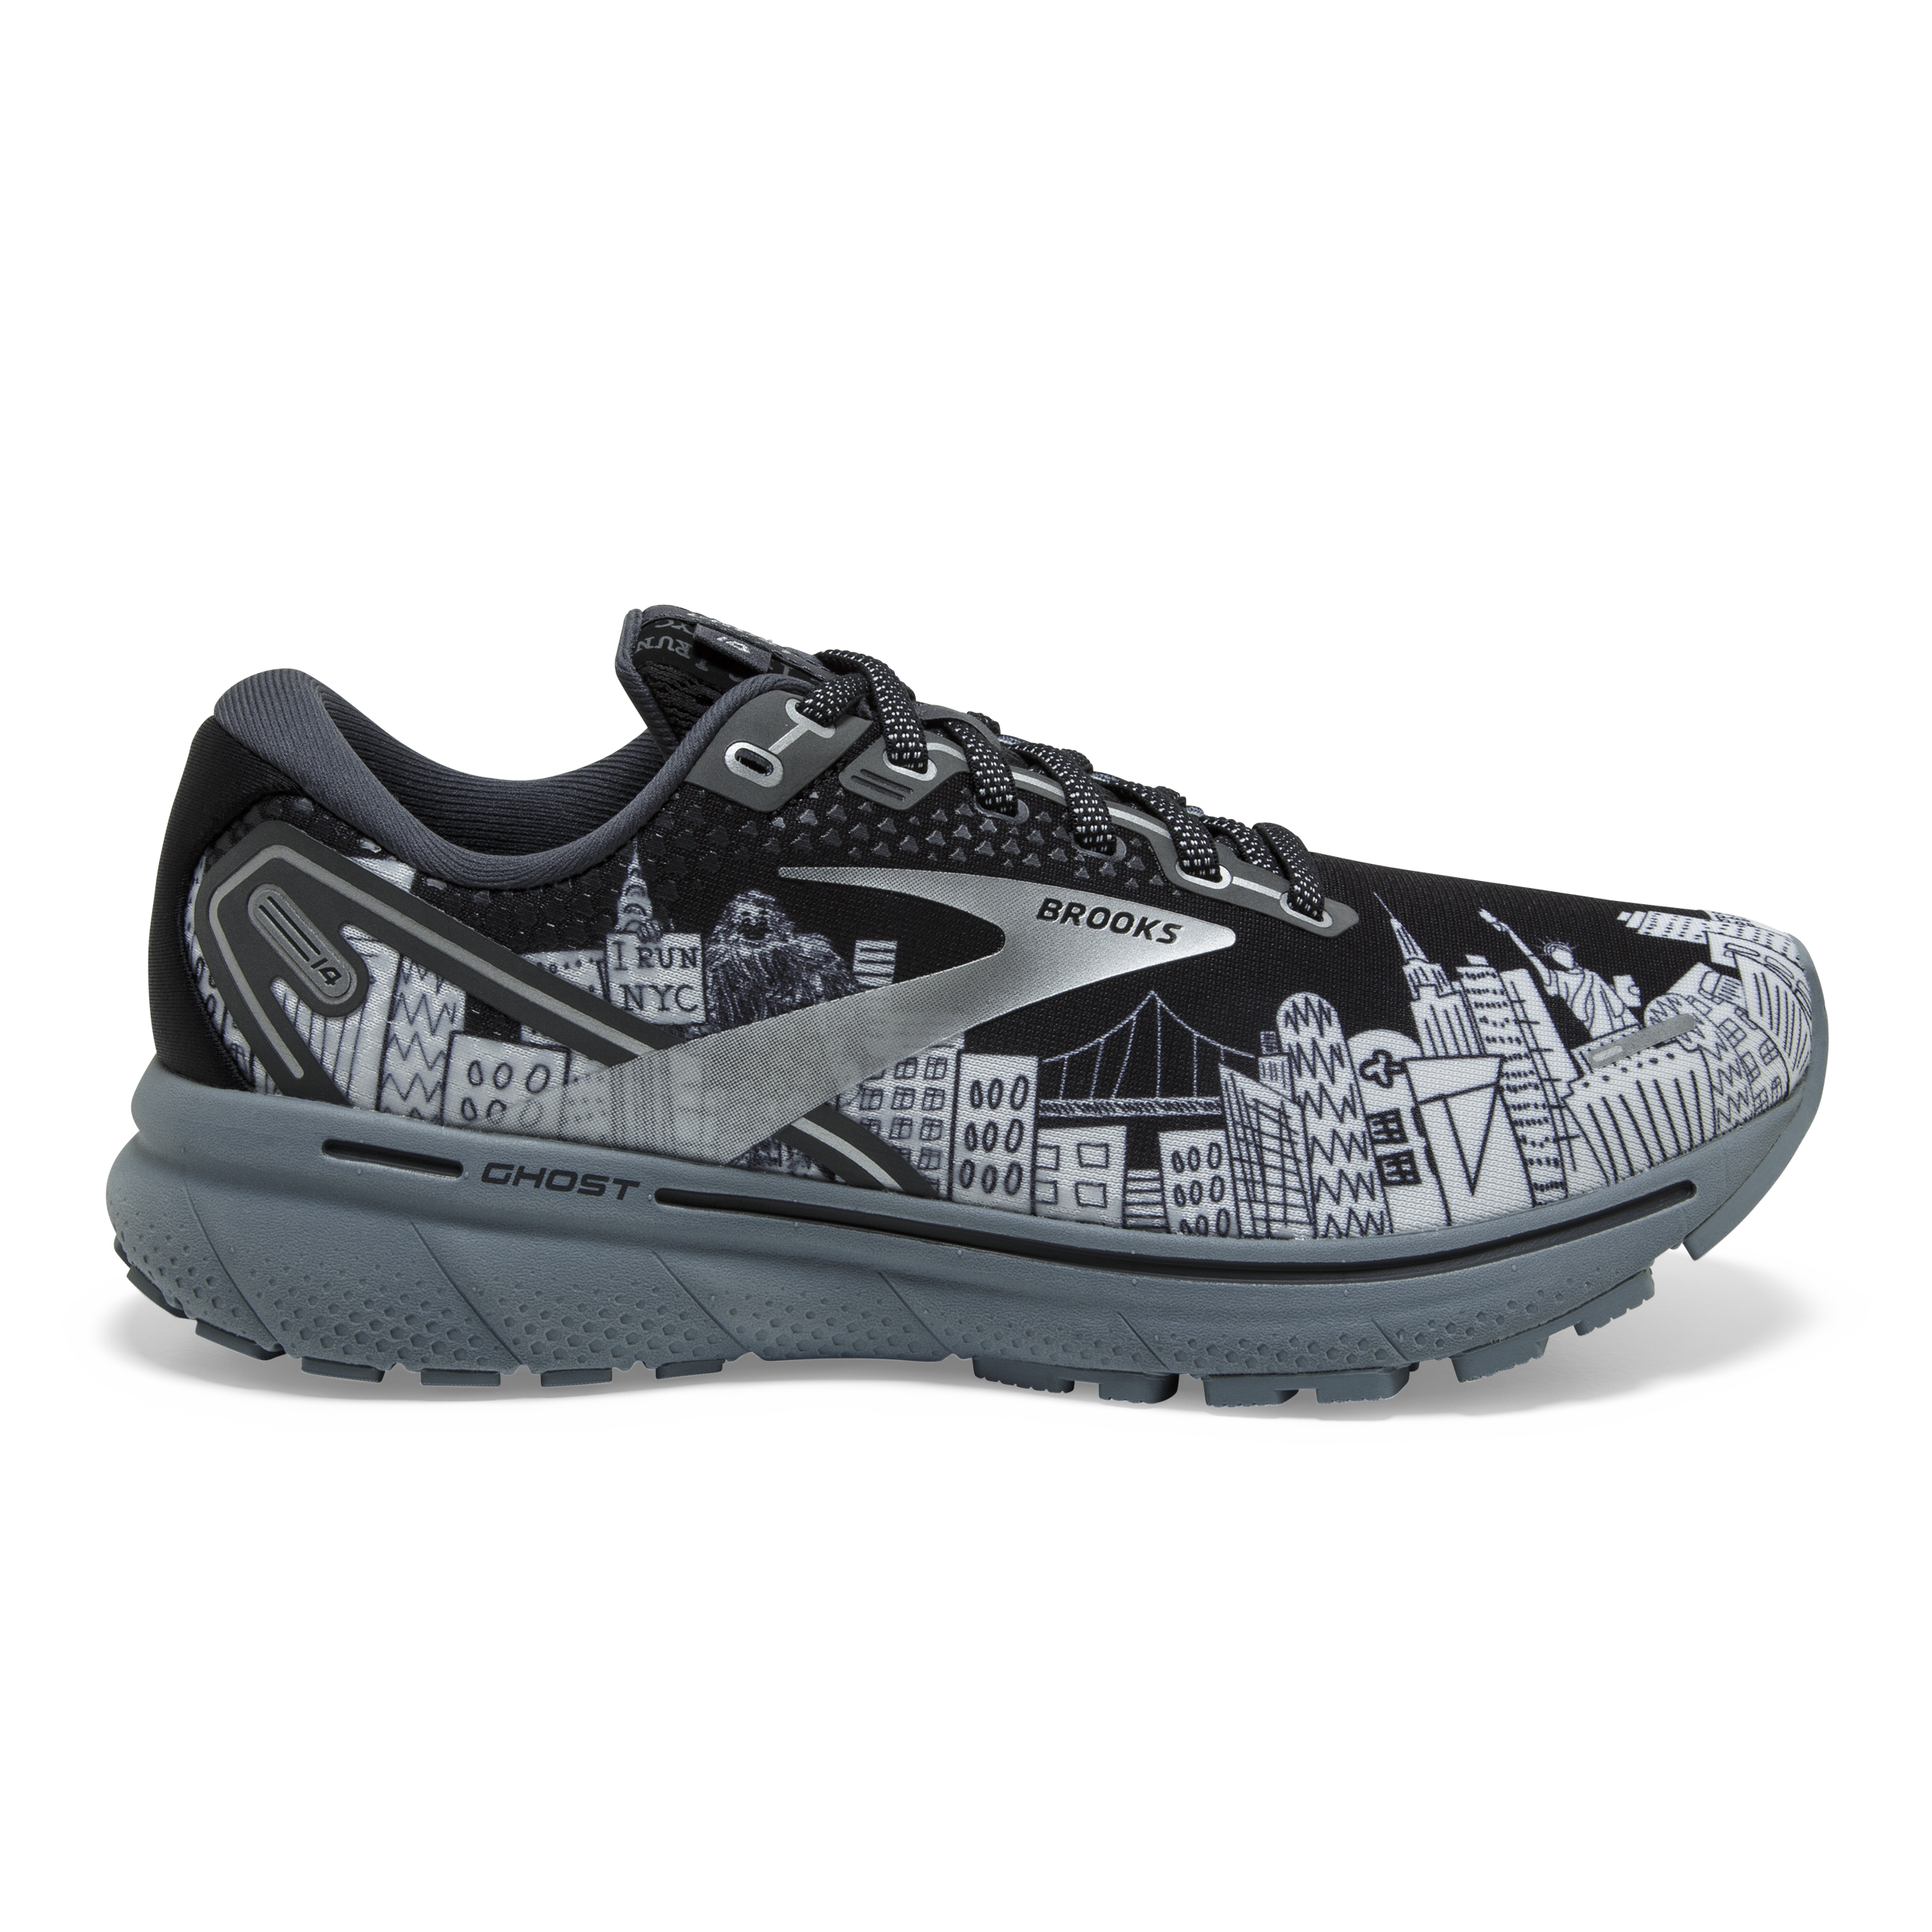 Ghost 14 - Men's running shoes